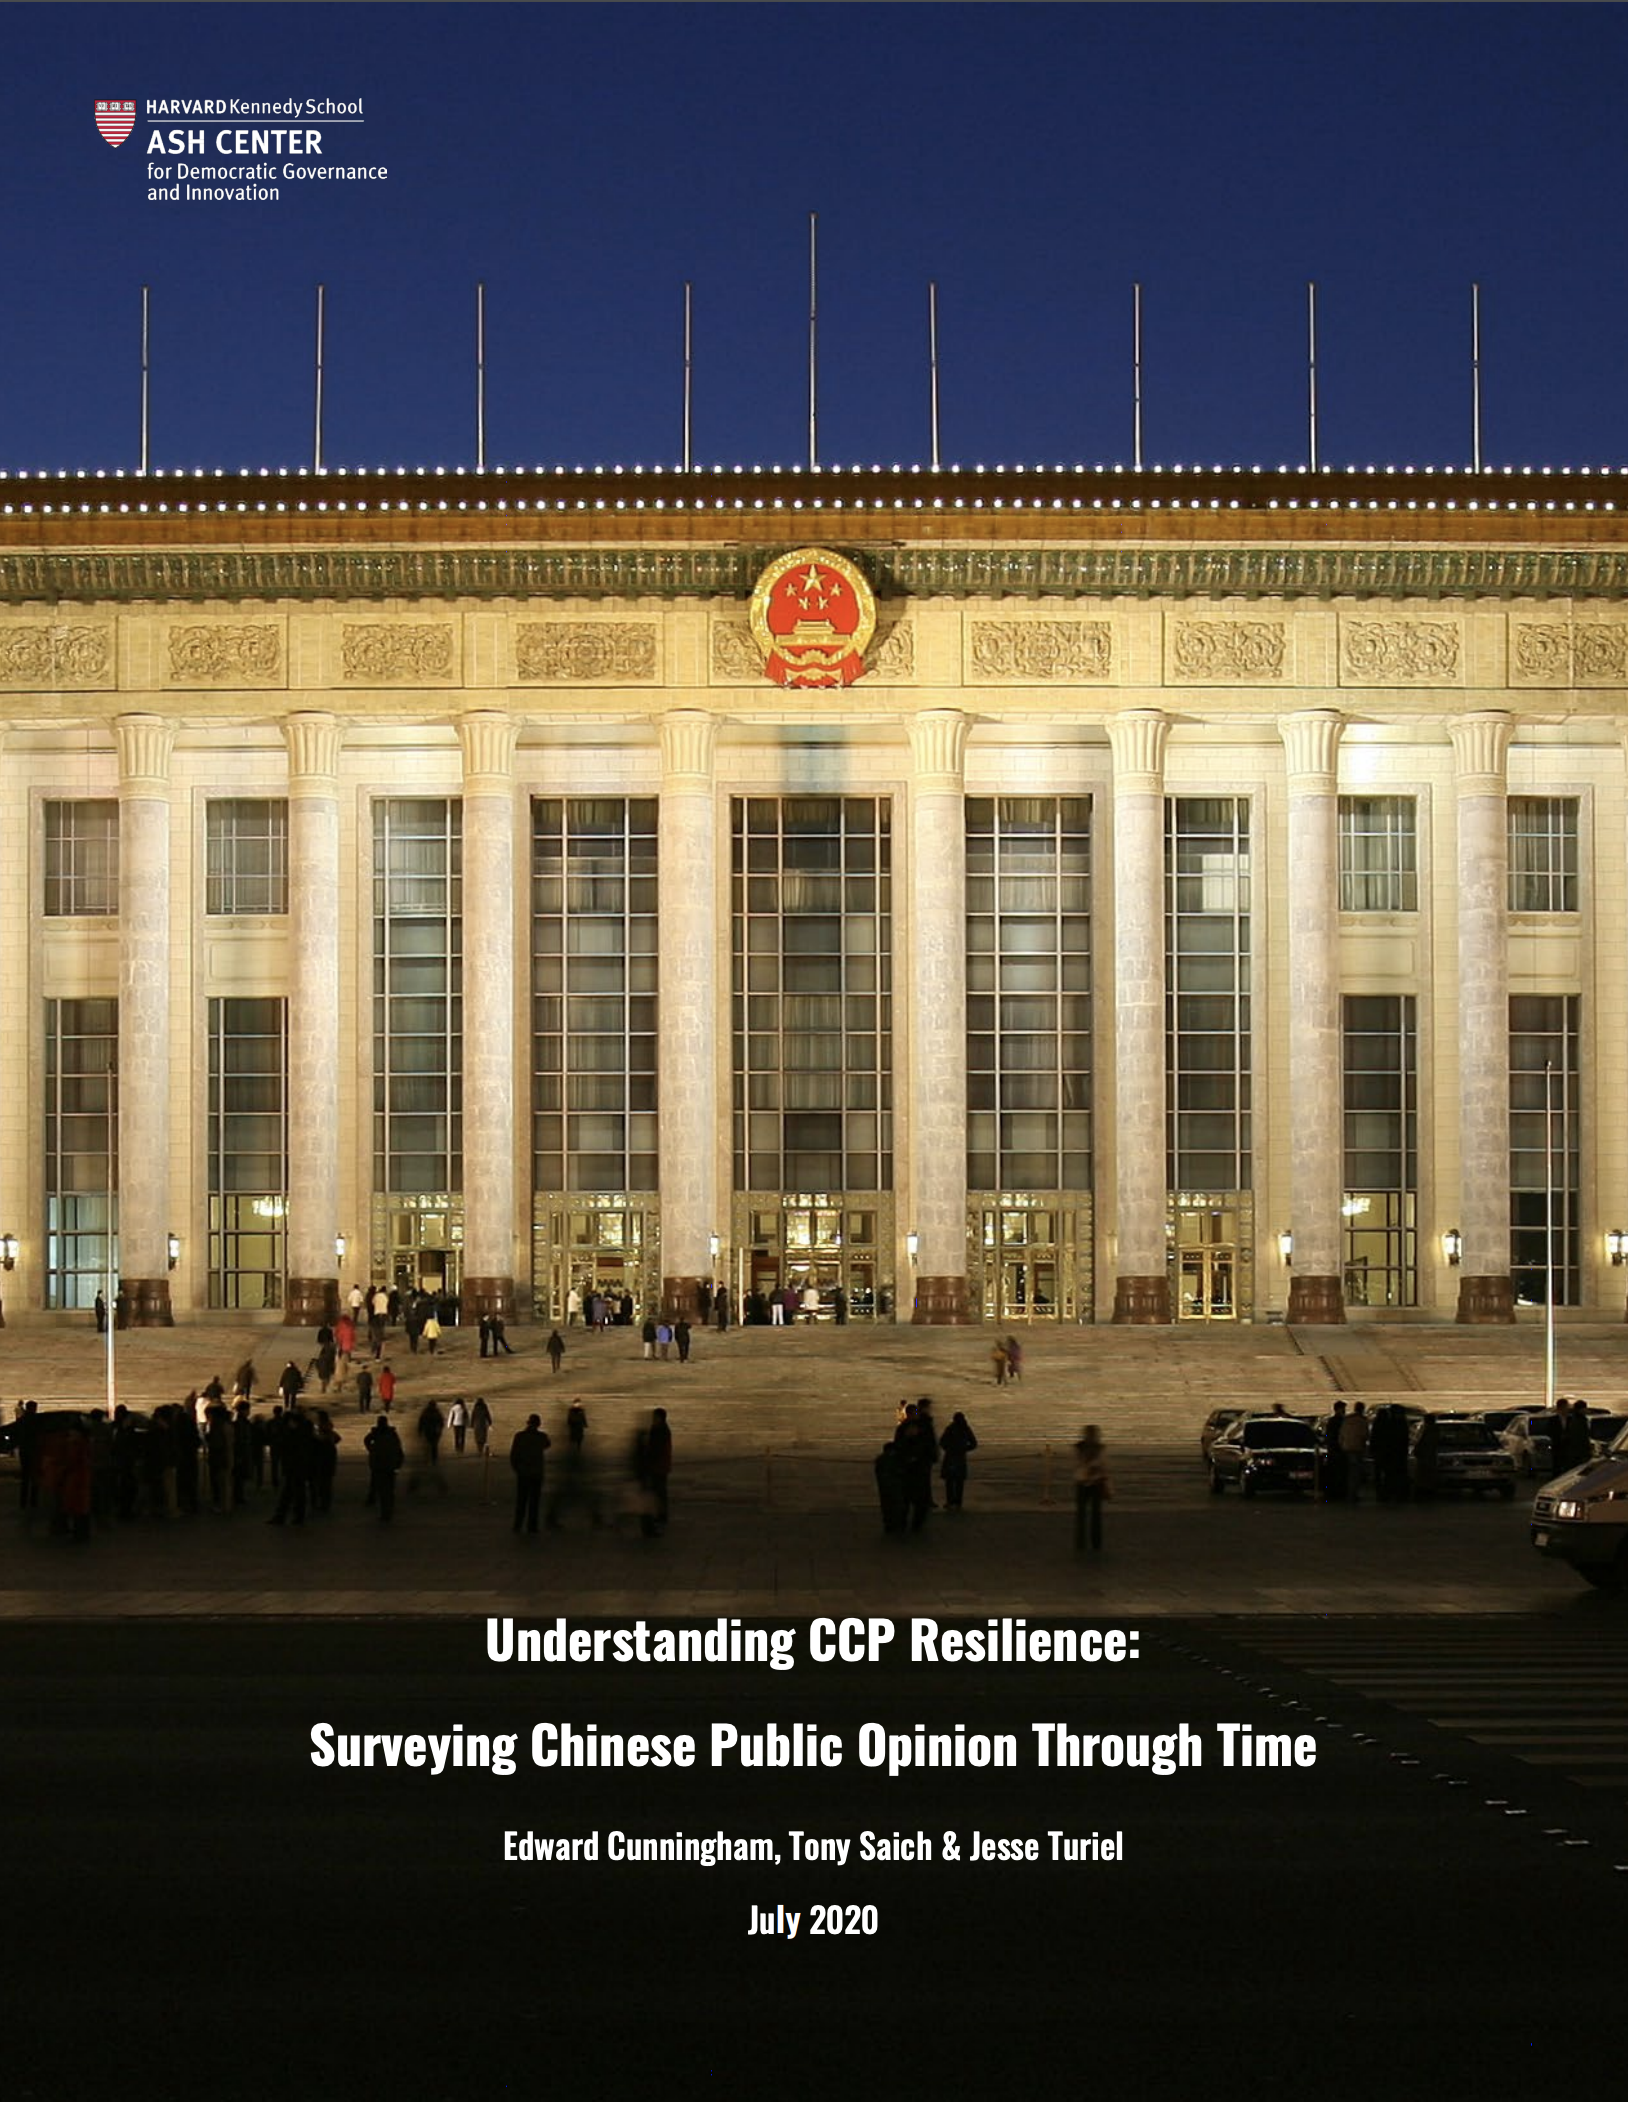 Understanding CCP Resilience: Surveying Chinese Public Opinion Through Time